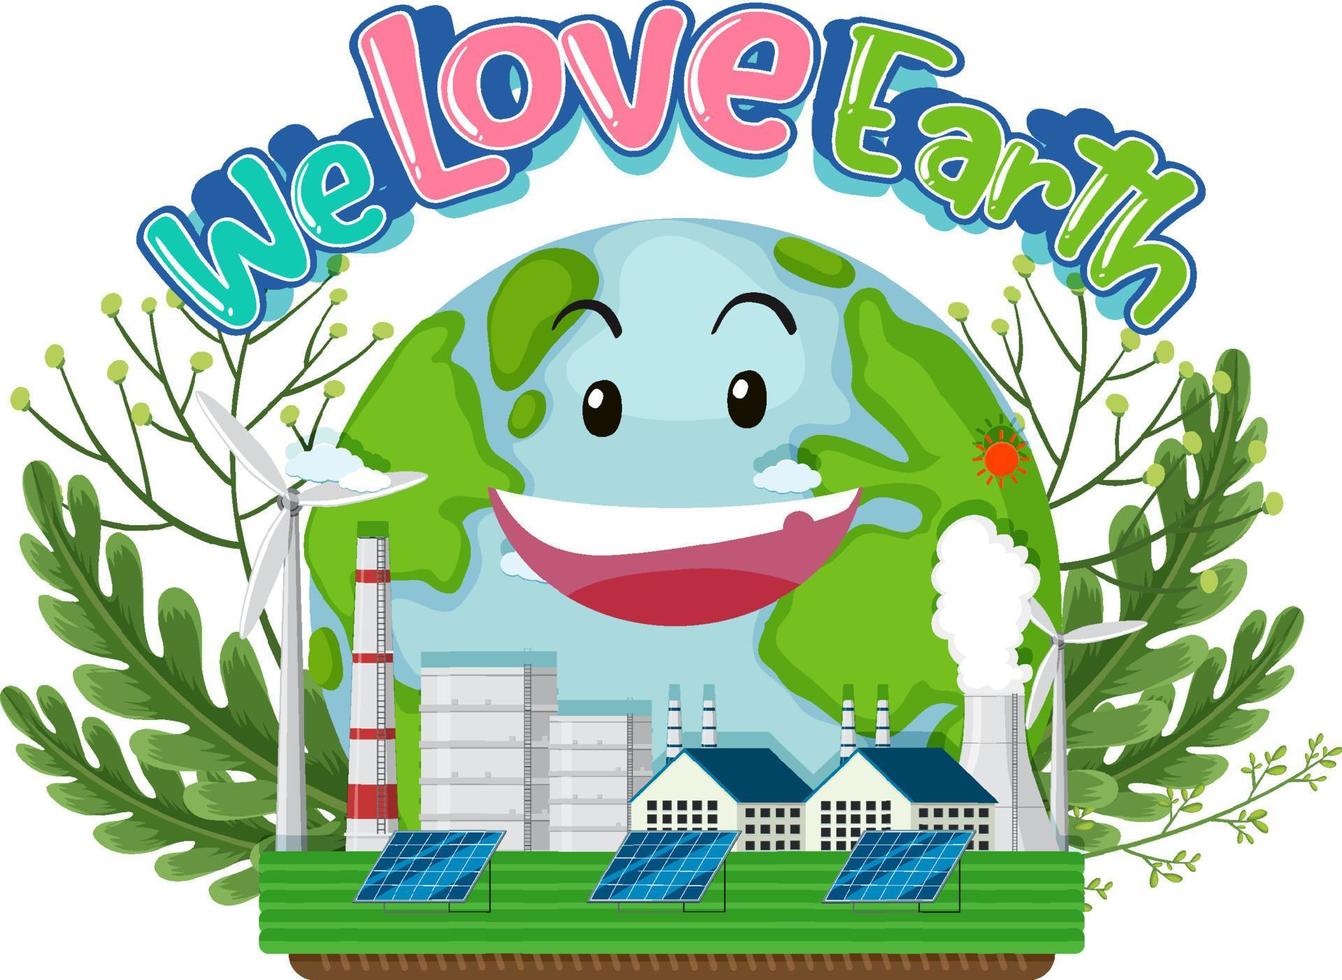 We Love Earth logo design with smiley earth vector